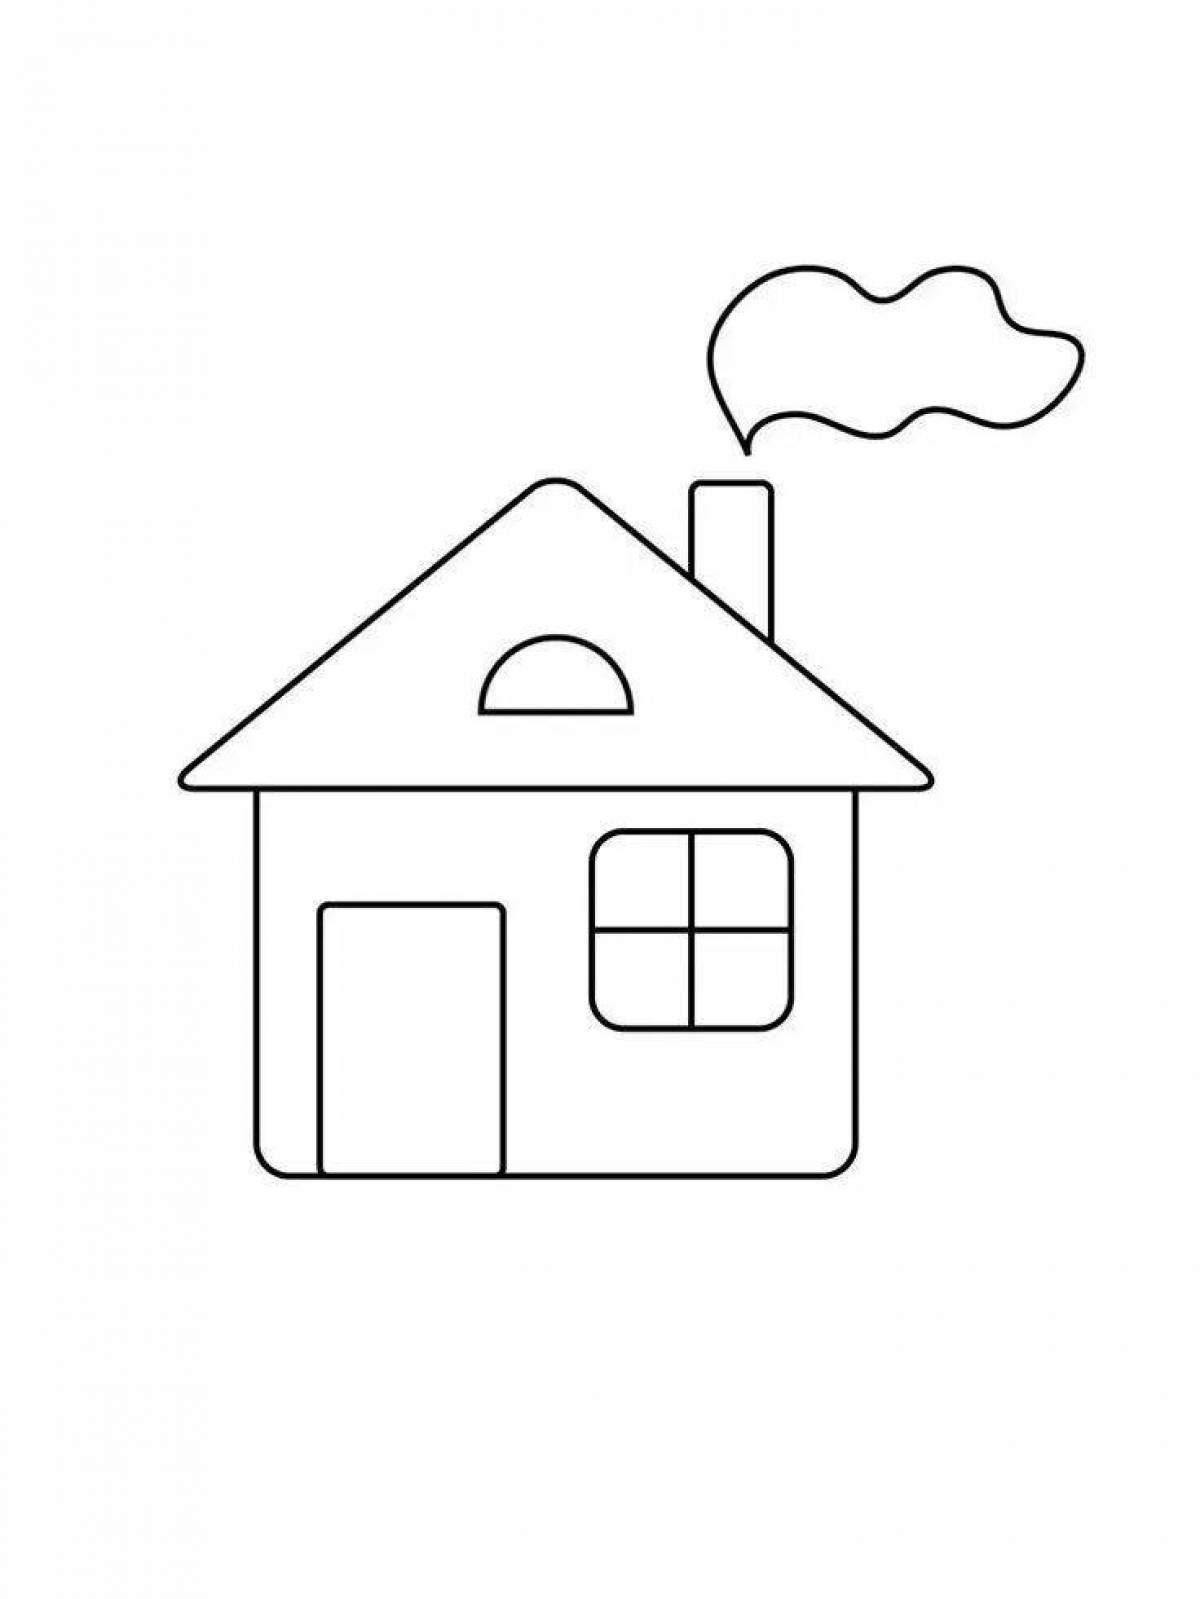 Great houses coloring pages for kids